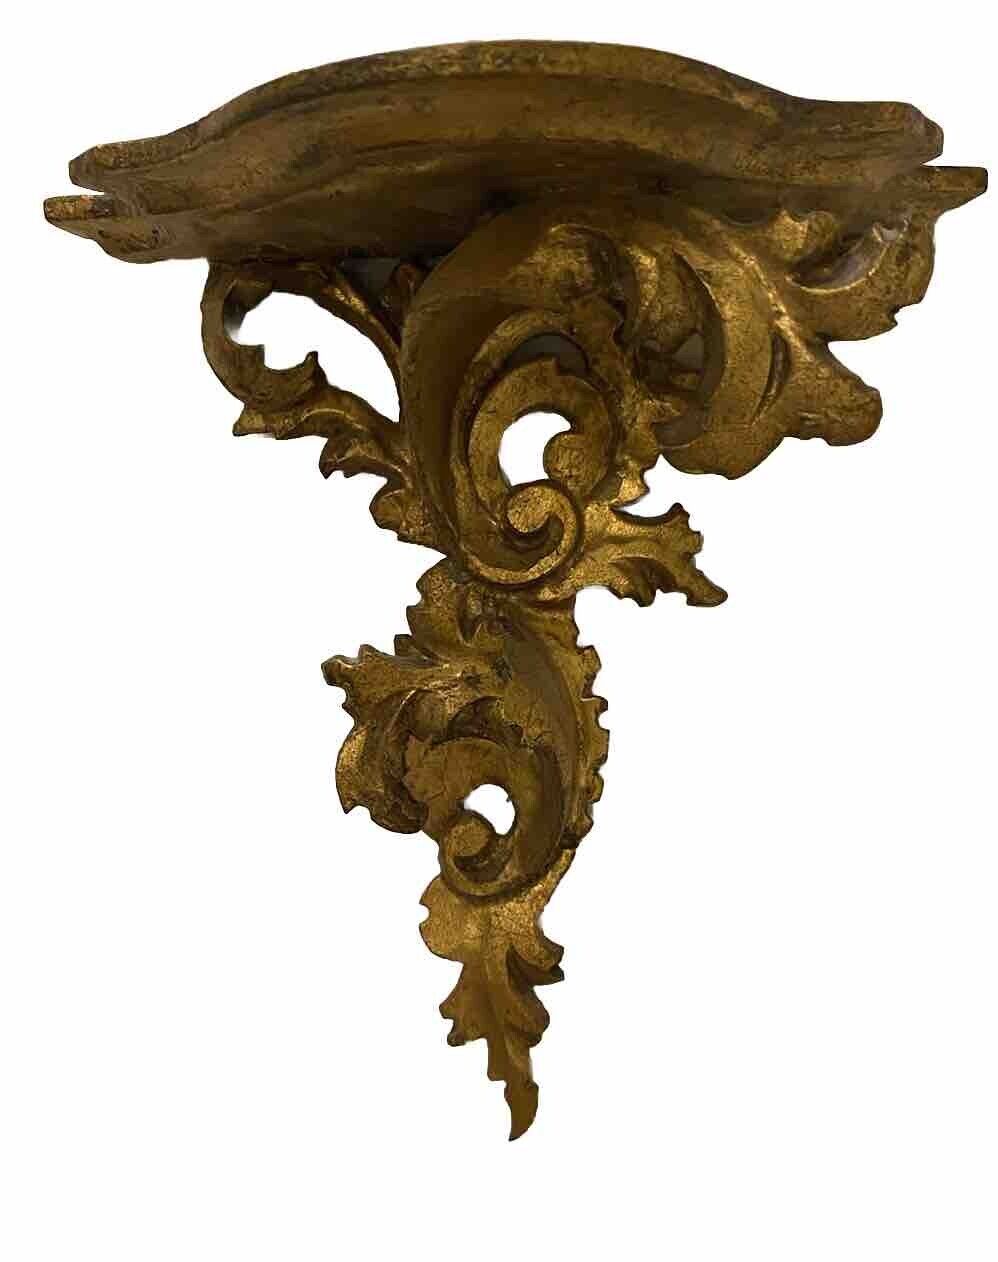 Italian Florentina Wall Shelf Gilded Wood Carved Acanthus, Rococo Style (1 of 2)